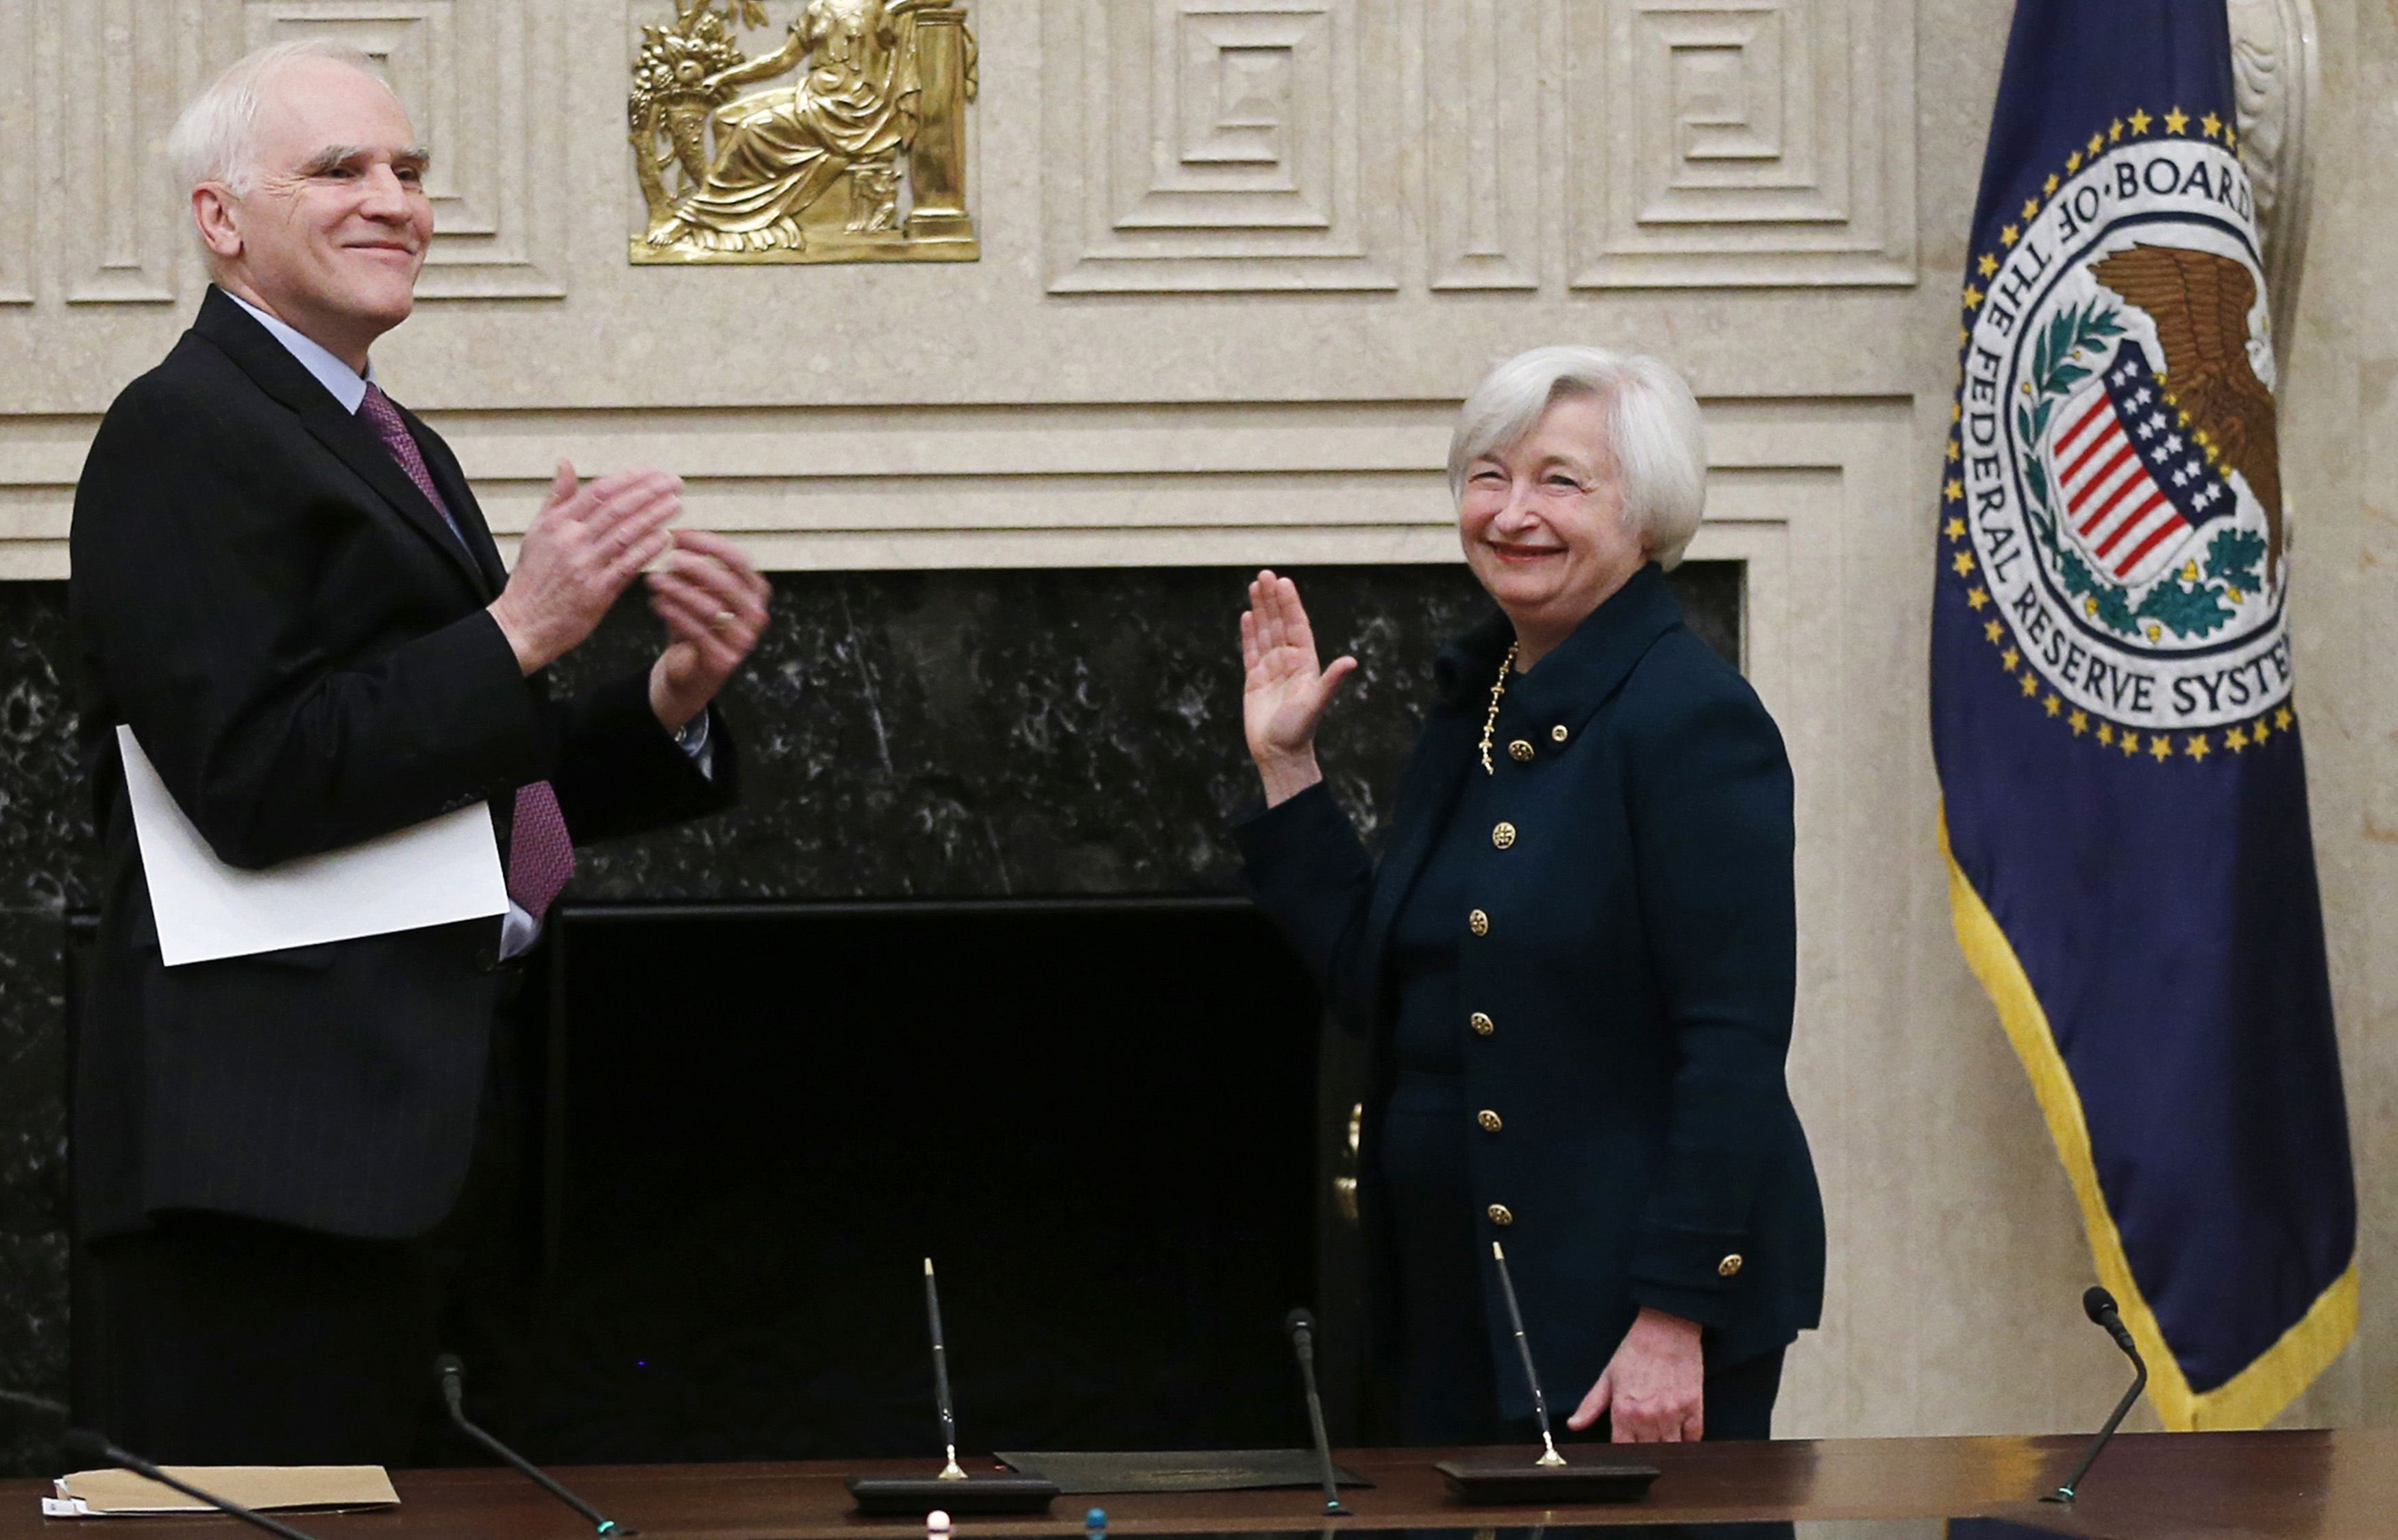 Federal Reserve Board Governor Daniel Tarullo (L) applauds new Federal Reserve Board Chairwoman Janet Yellen after administering the oath of office to Yellen at the Federal Reserve Board in Washington February 3, 2014. (JIM BOURG / REUTERS)